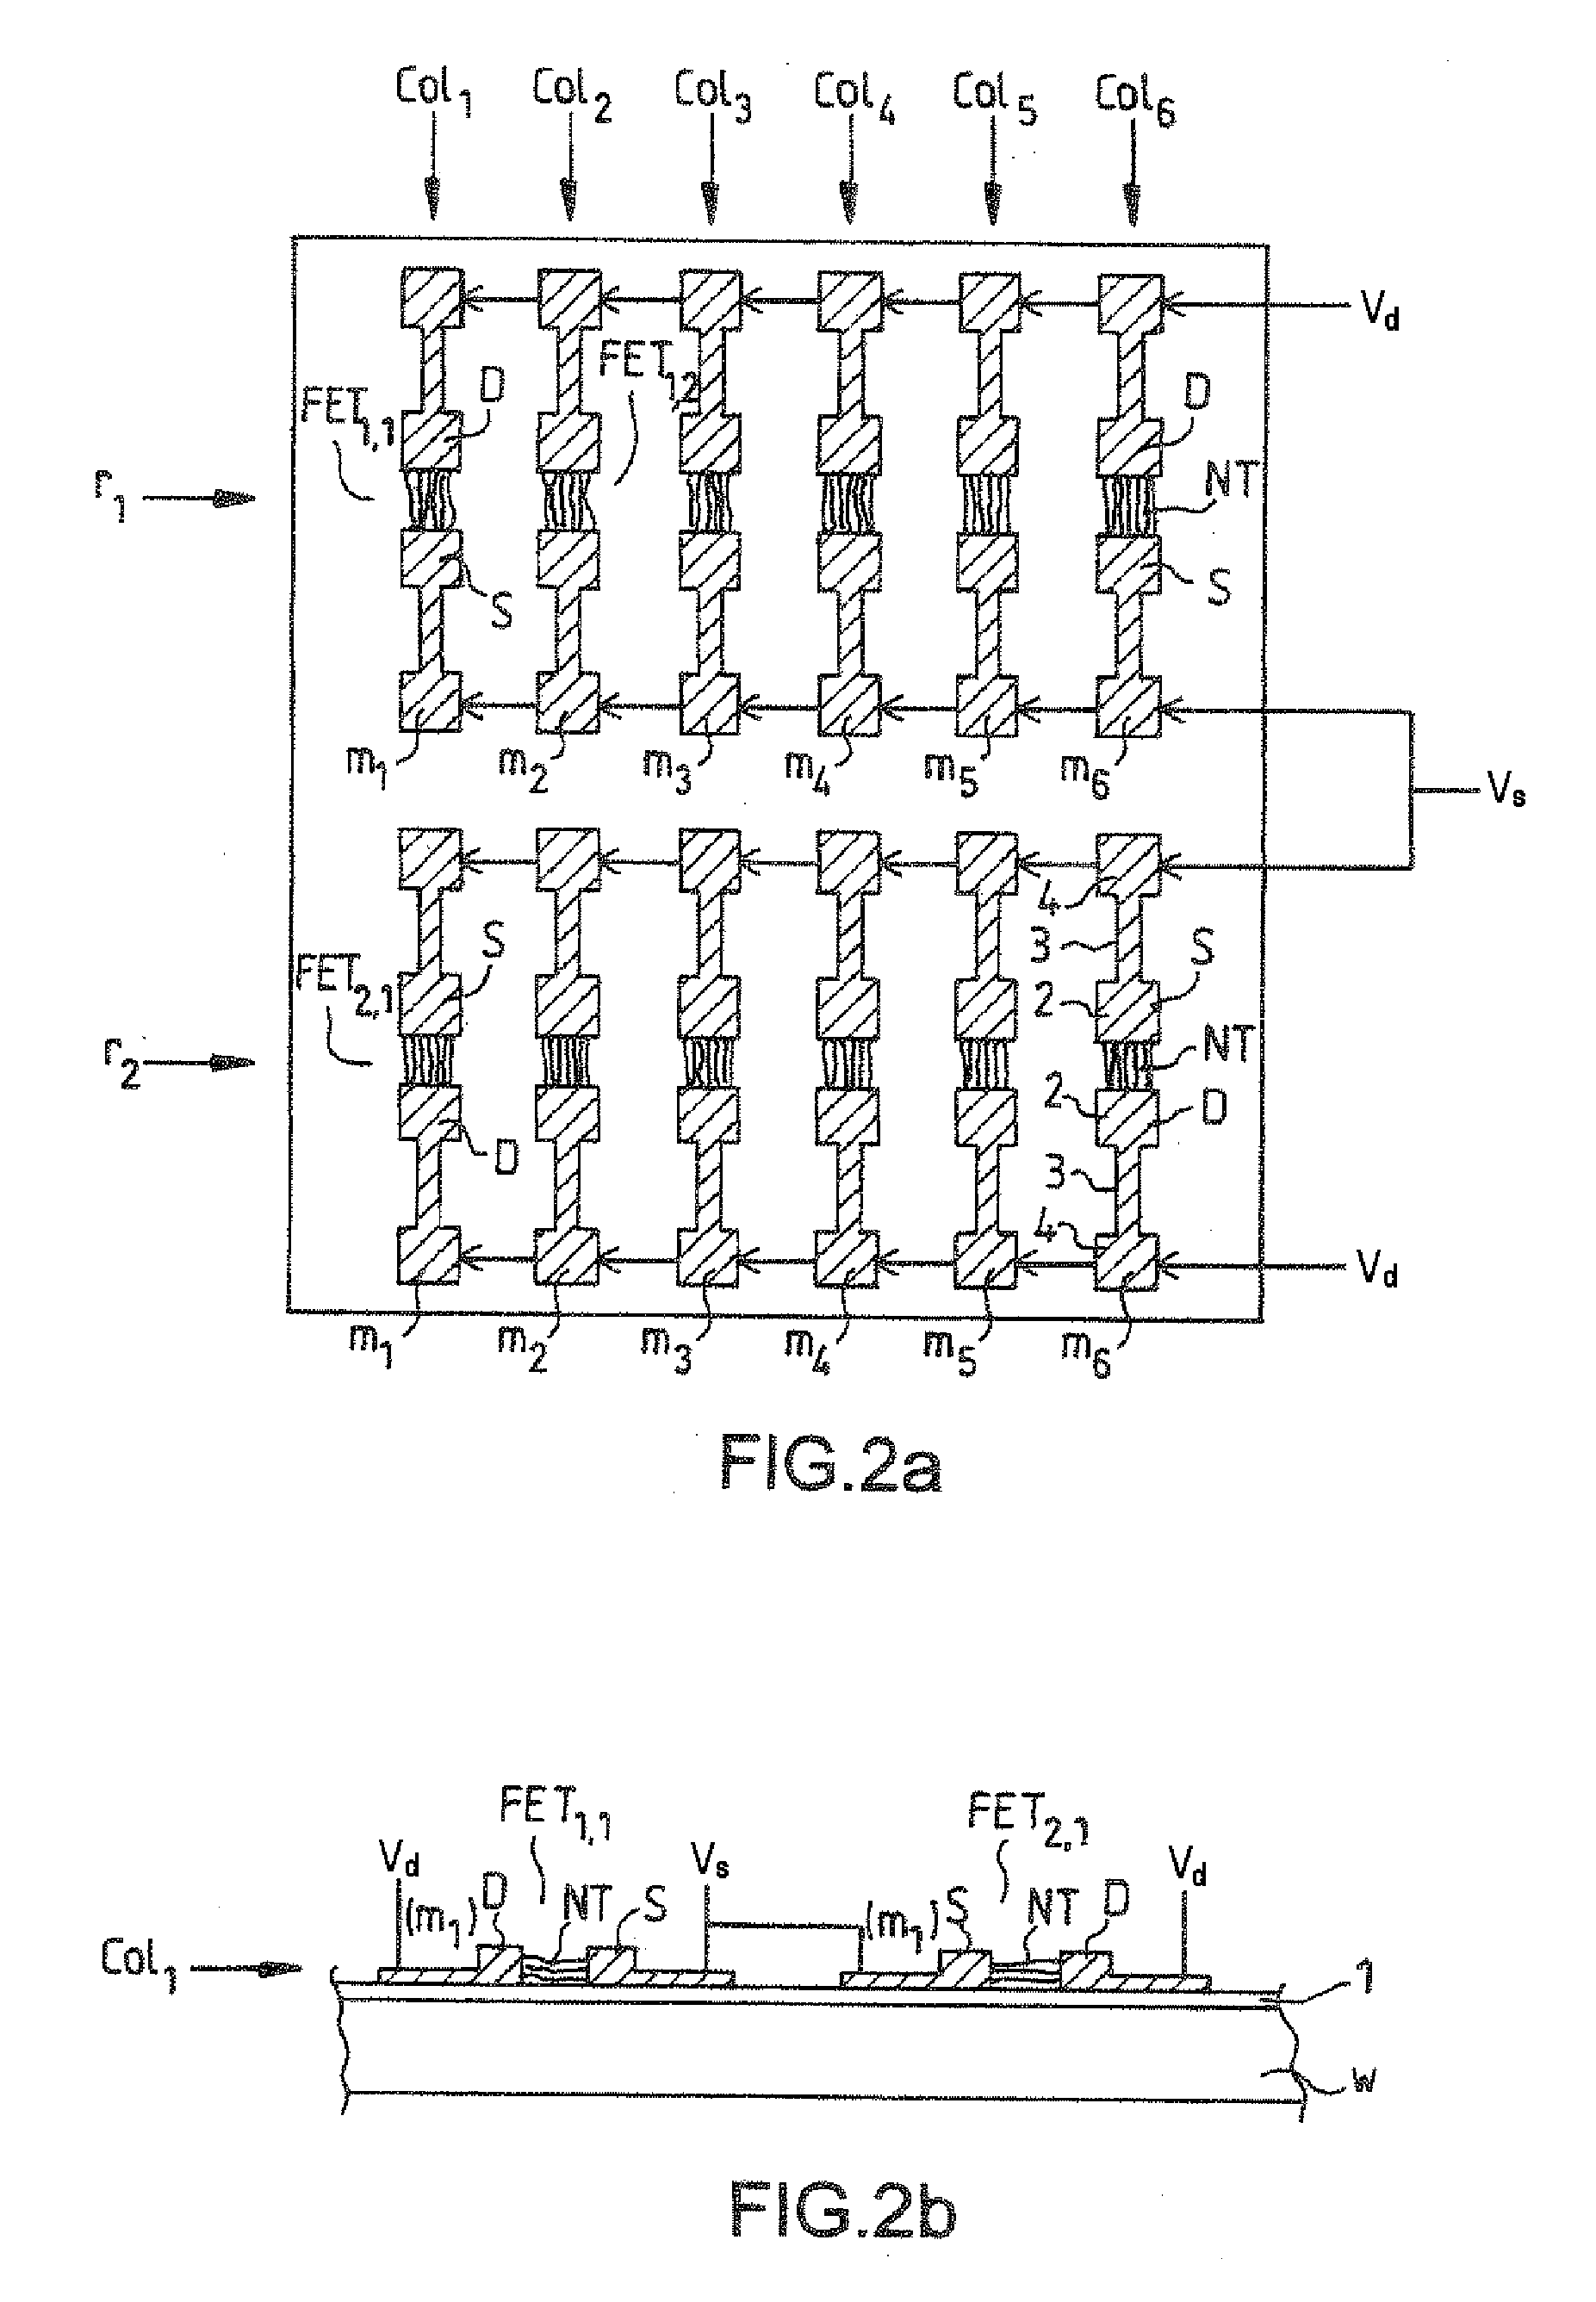 Array of Fet Transistors Having a Nanotube or Nanowire Semiconductor Element and Corresponding Electronic Device, For the Detection of Analytes